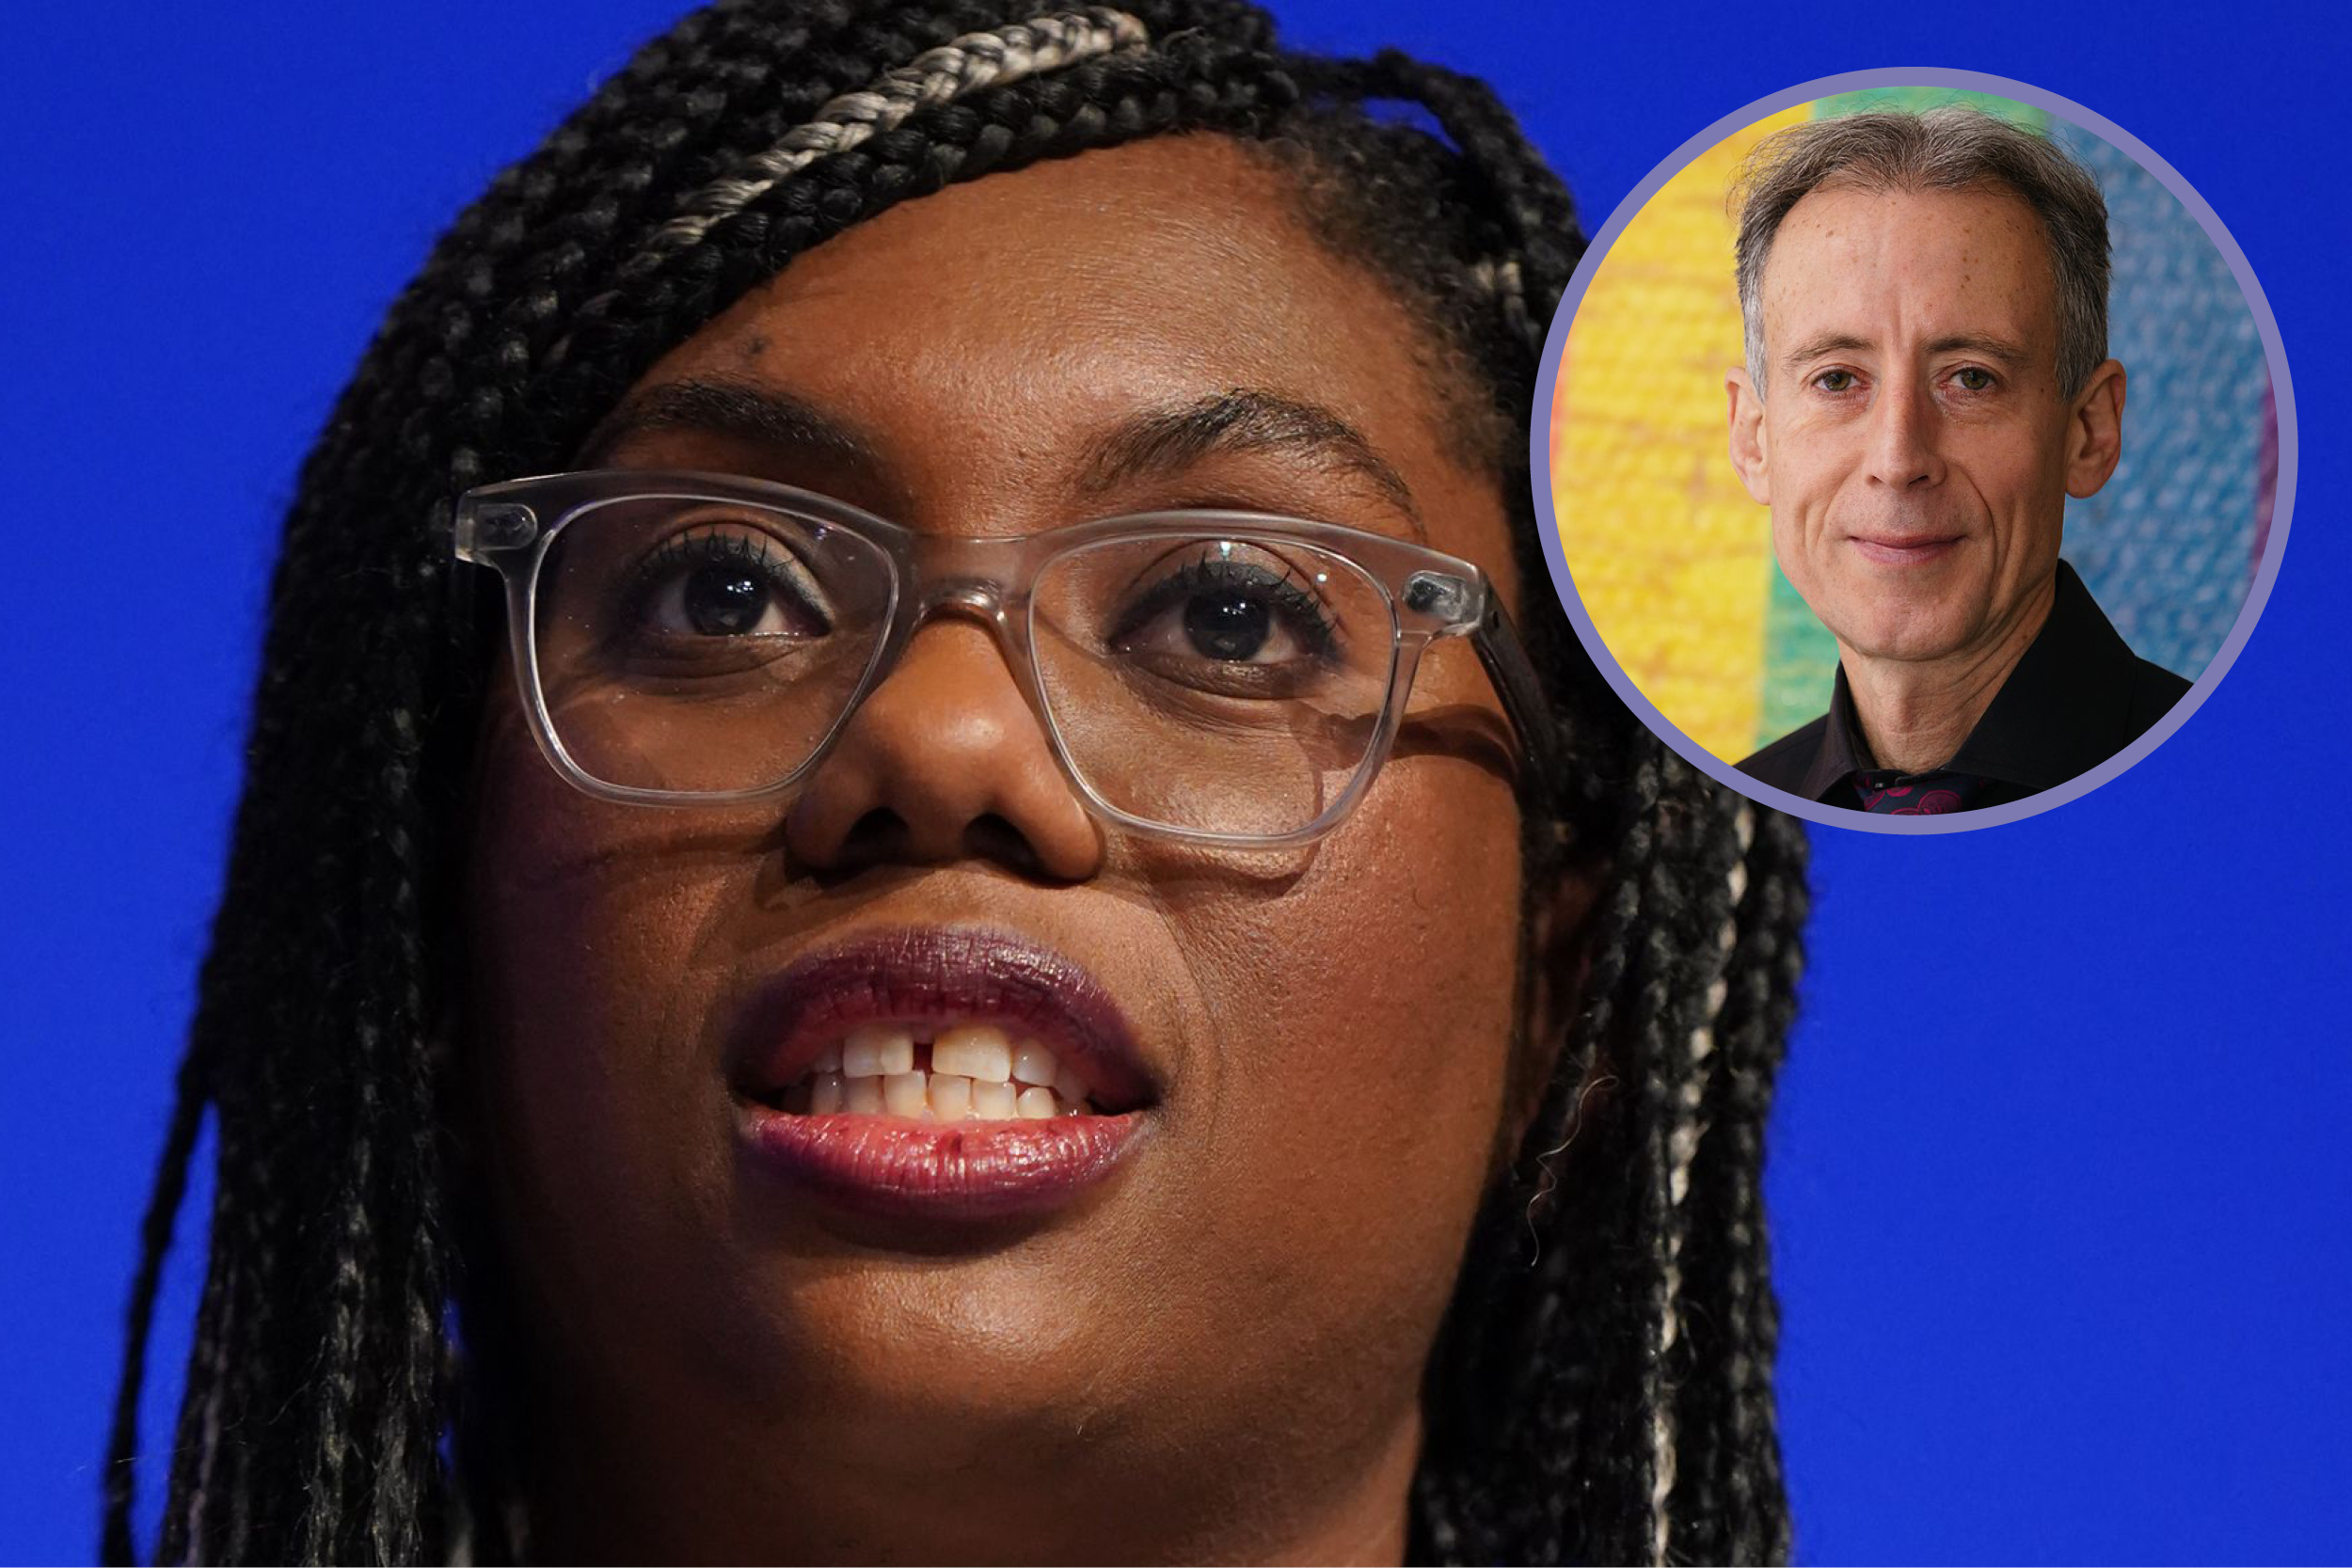 Peter Tatchell reacts after UK Equality Minister, Kemi Badenoch, refuses to meet with LGBTQ+ groups, including Stonewall, Mermaids, Terrence Higgins Trust and the Ban Conversion Therapy Coalition